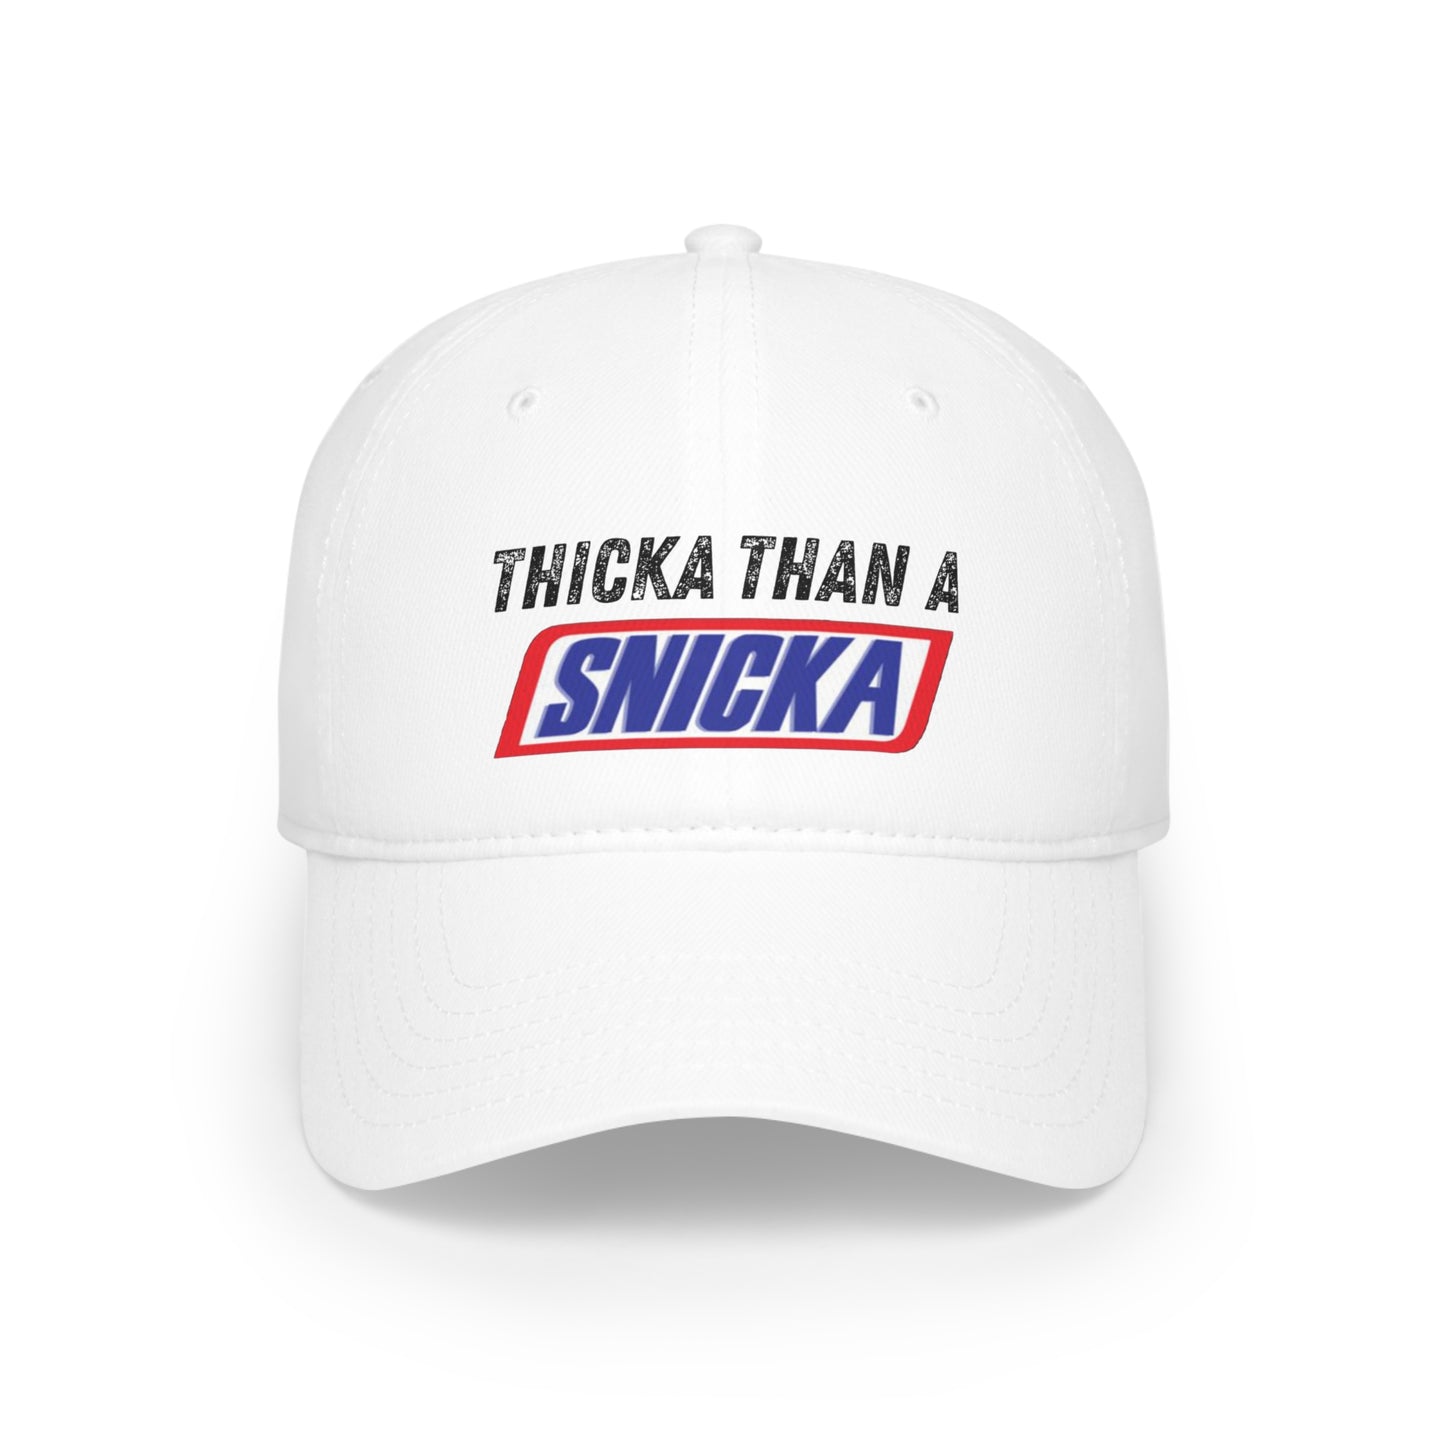 "Thicka Than A Snicka" Hat